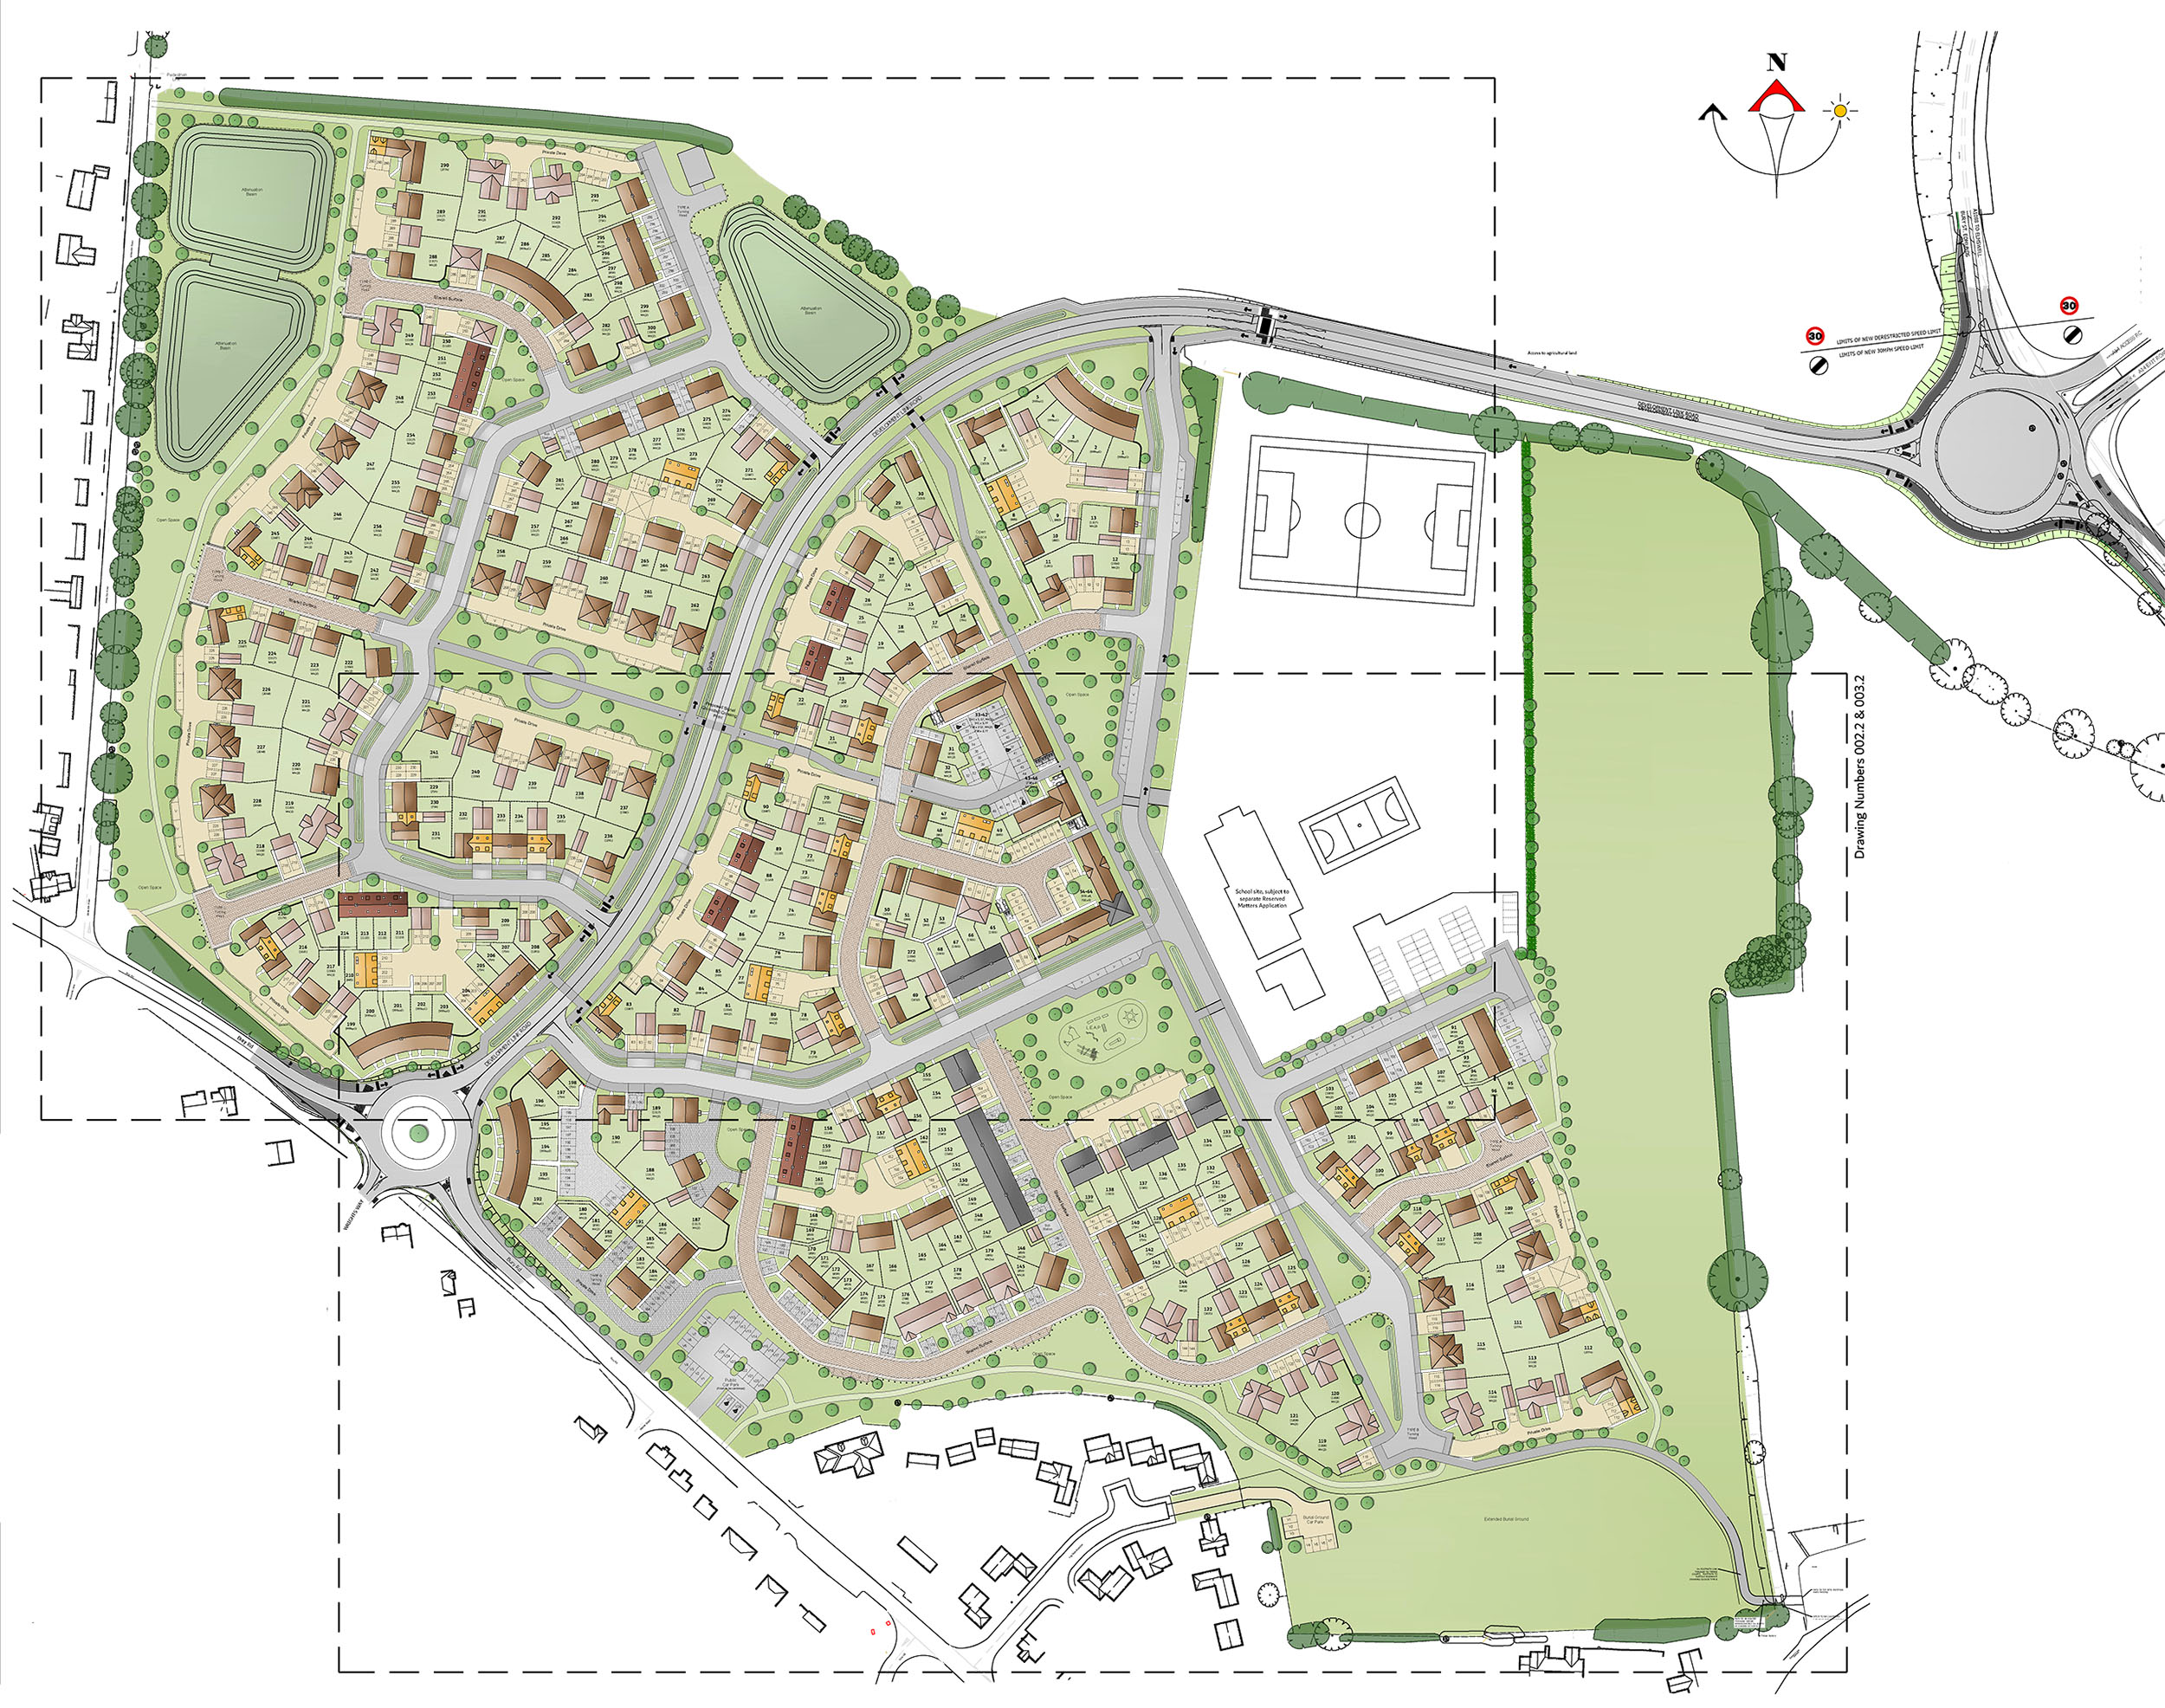 Woolpit planning layout - Sept 22- Hopkins Homes